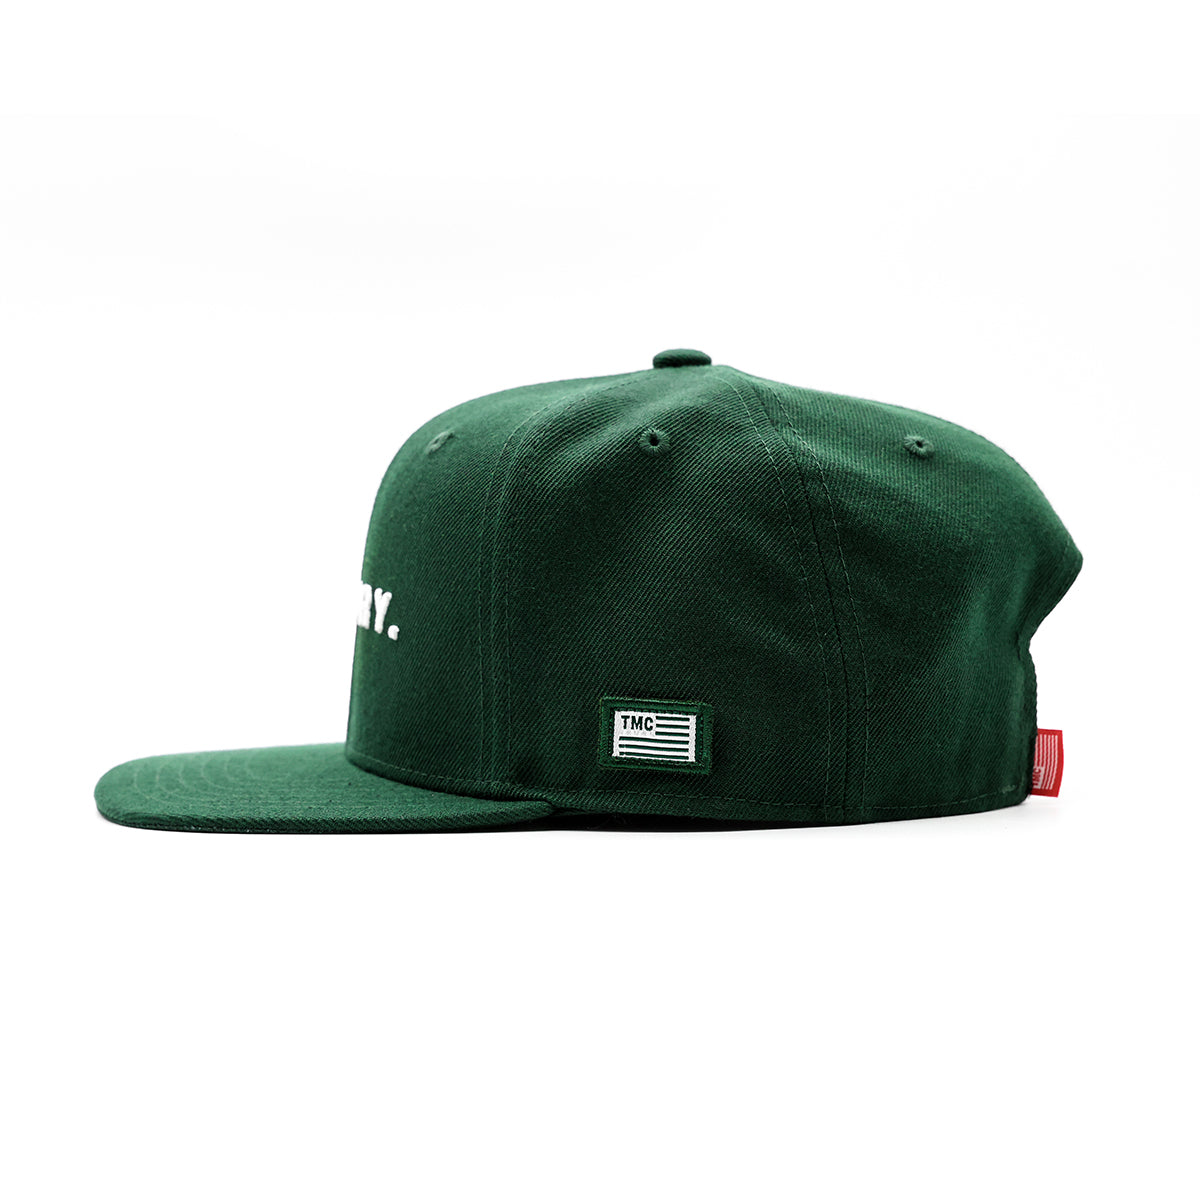 Victory Limited Edition Snapback - Green/White - Side